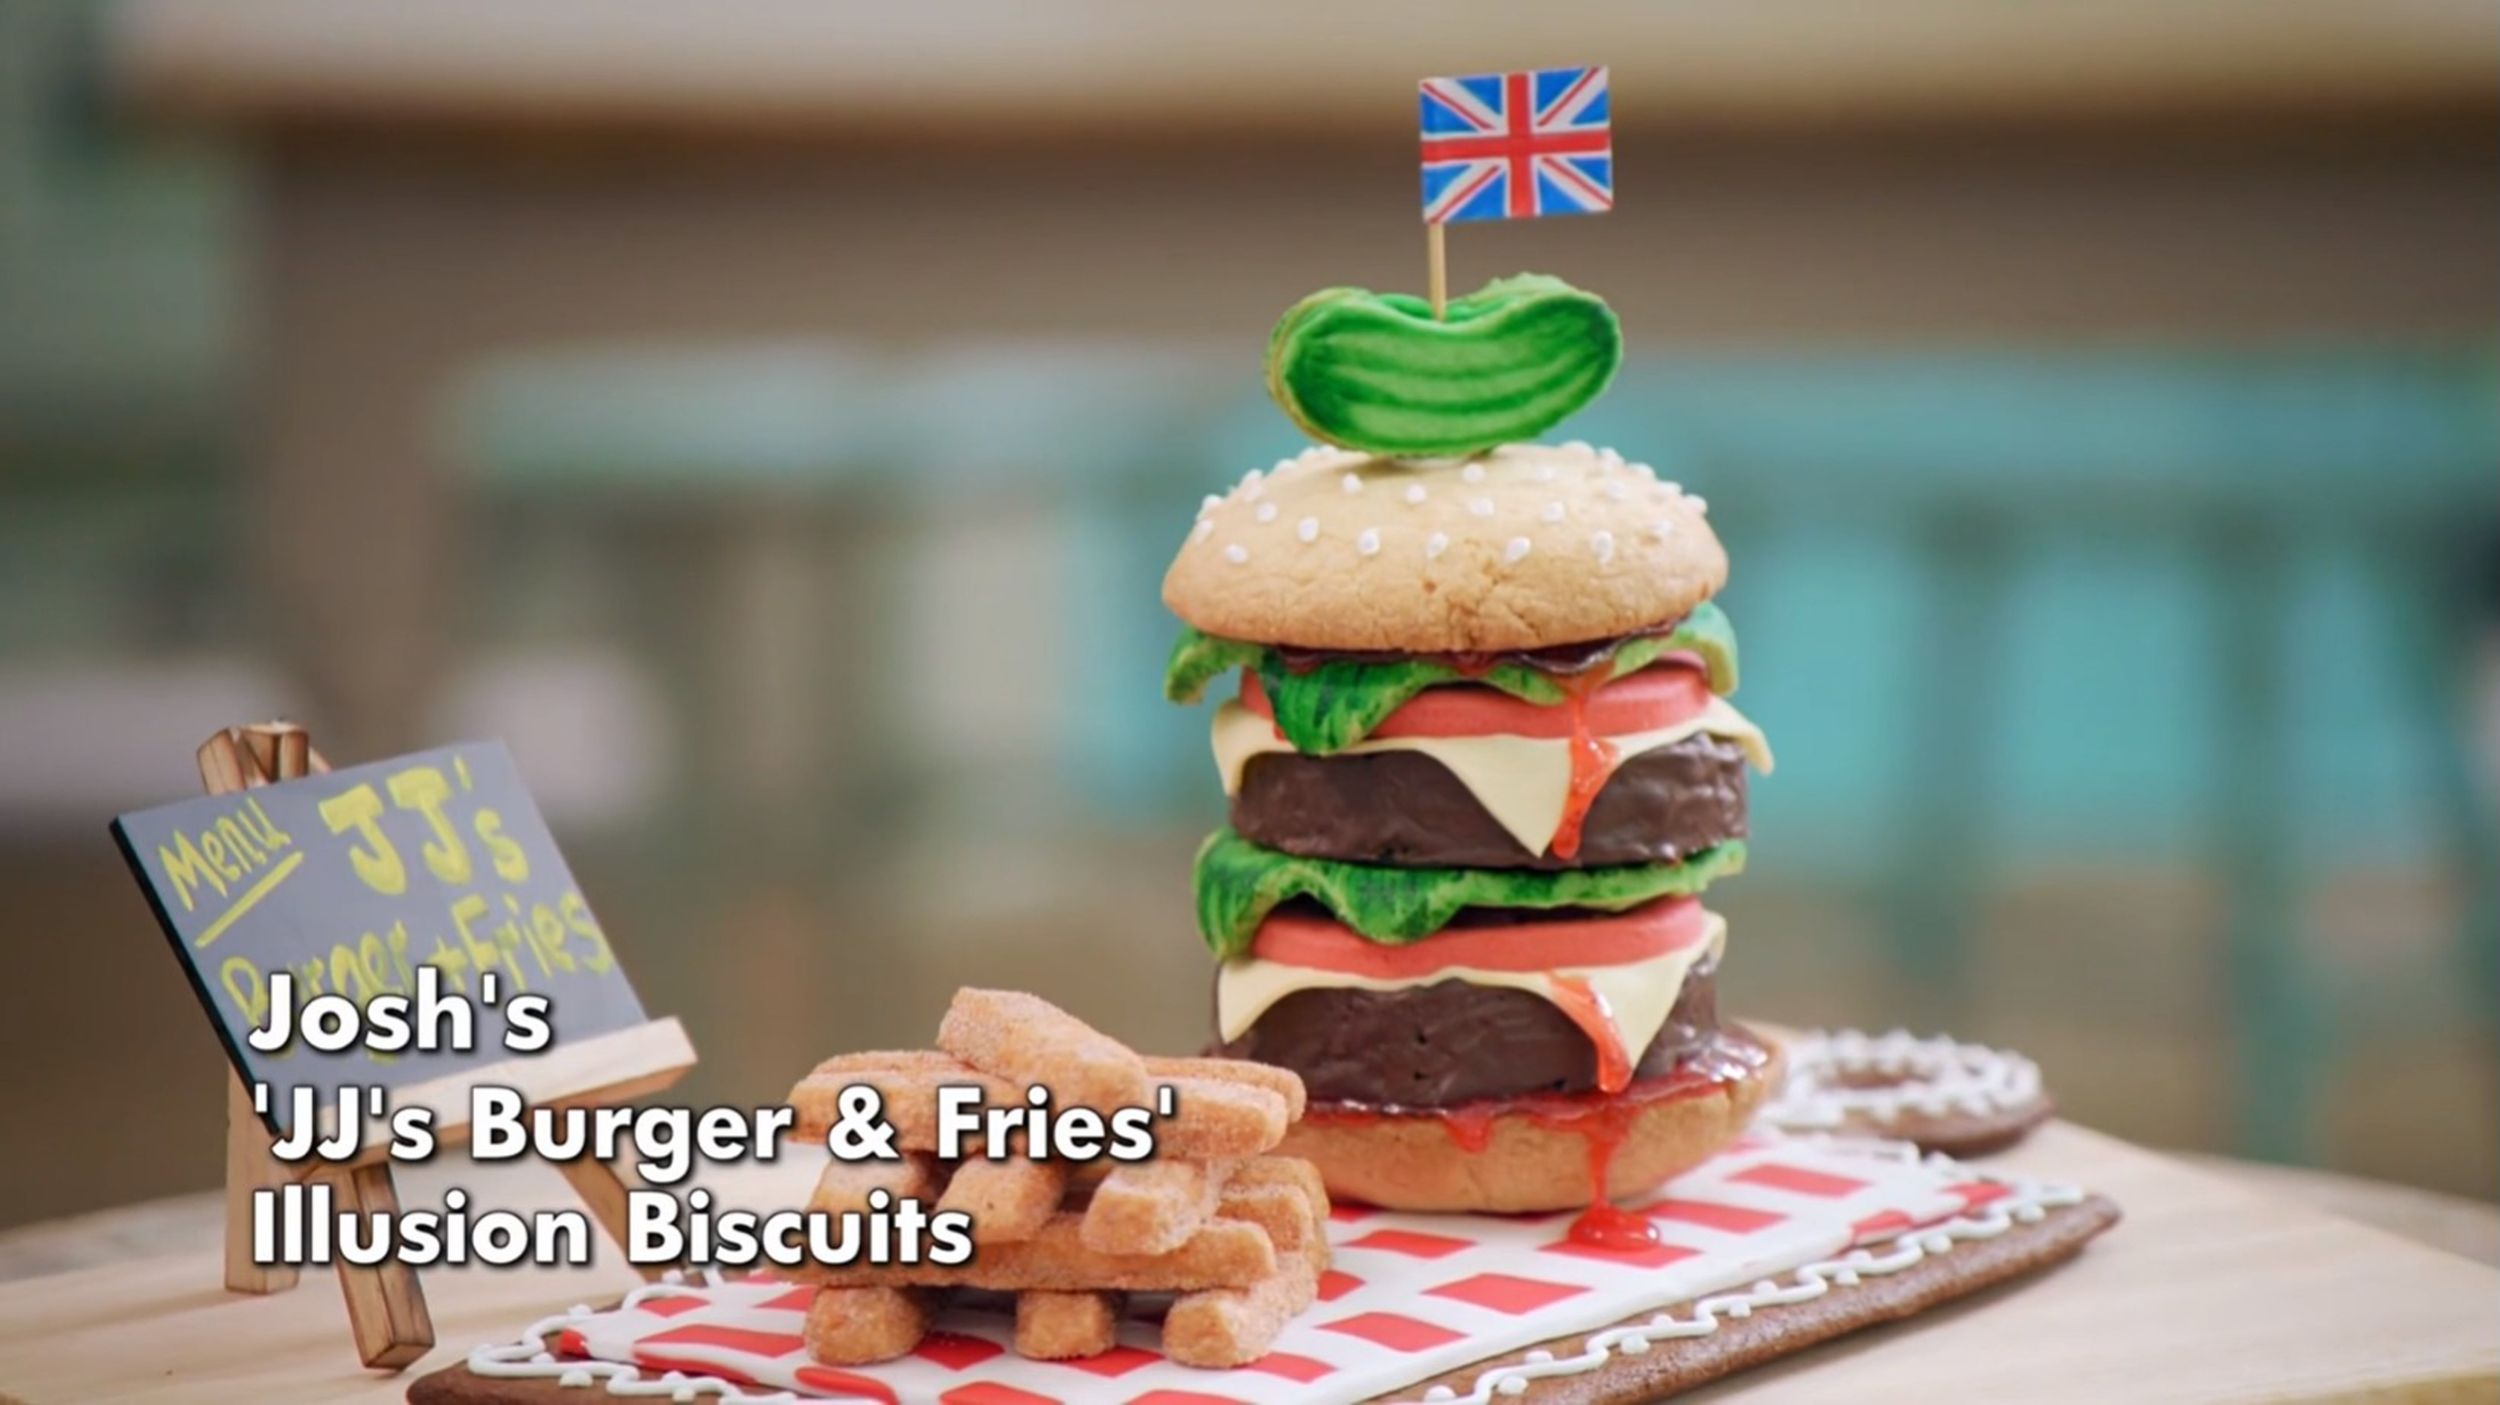 Josh’s JJ's Burger & Fries Illusion Biscuit Showstopper from 'The Great British Baking Show' Season 14's Biscuit Week